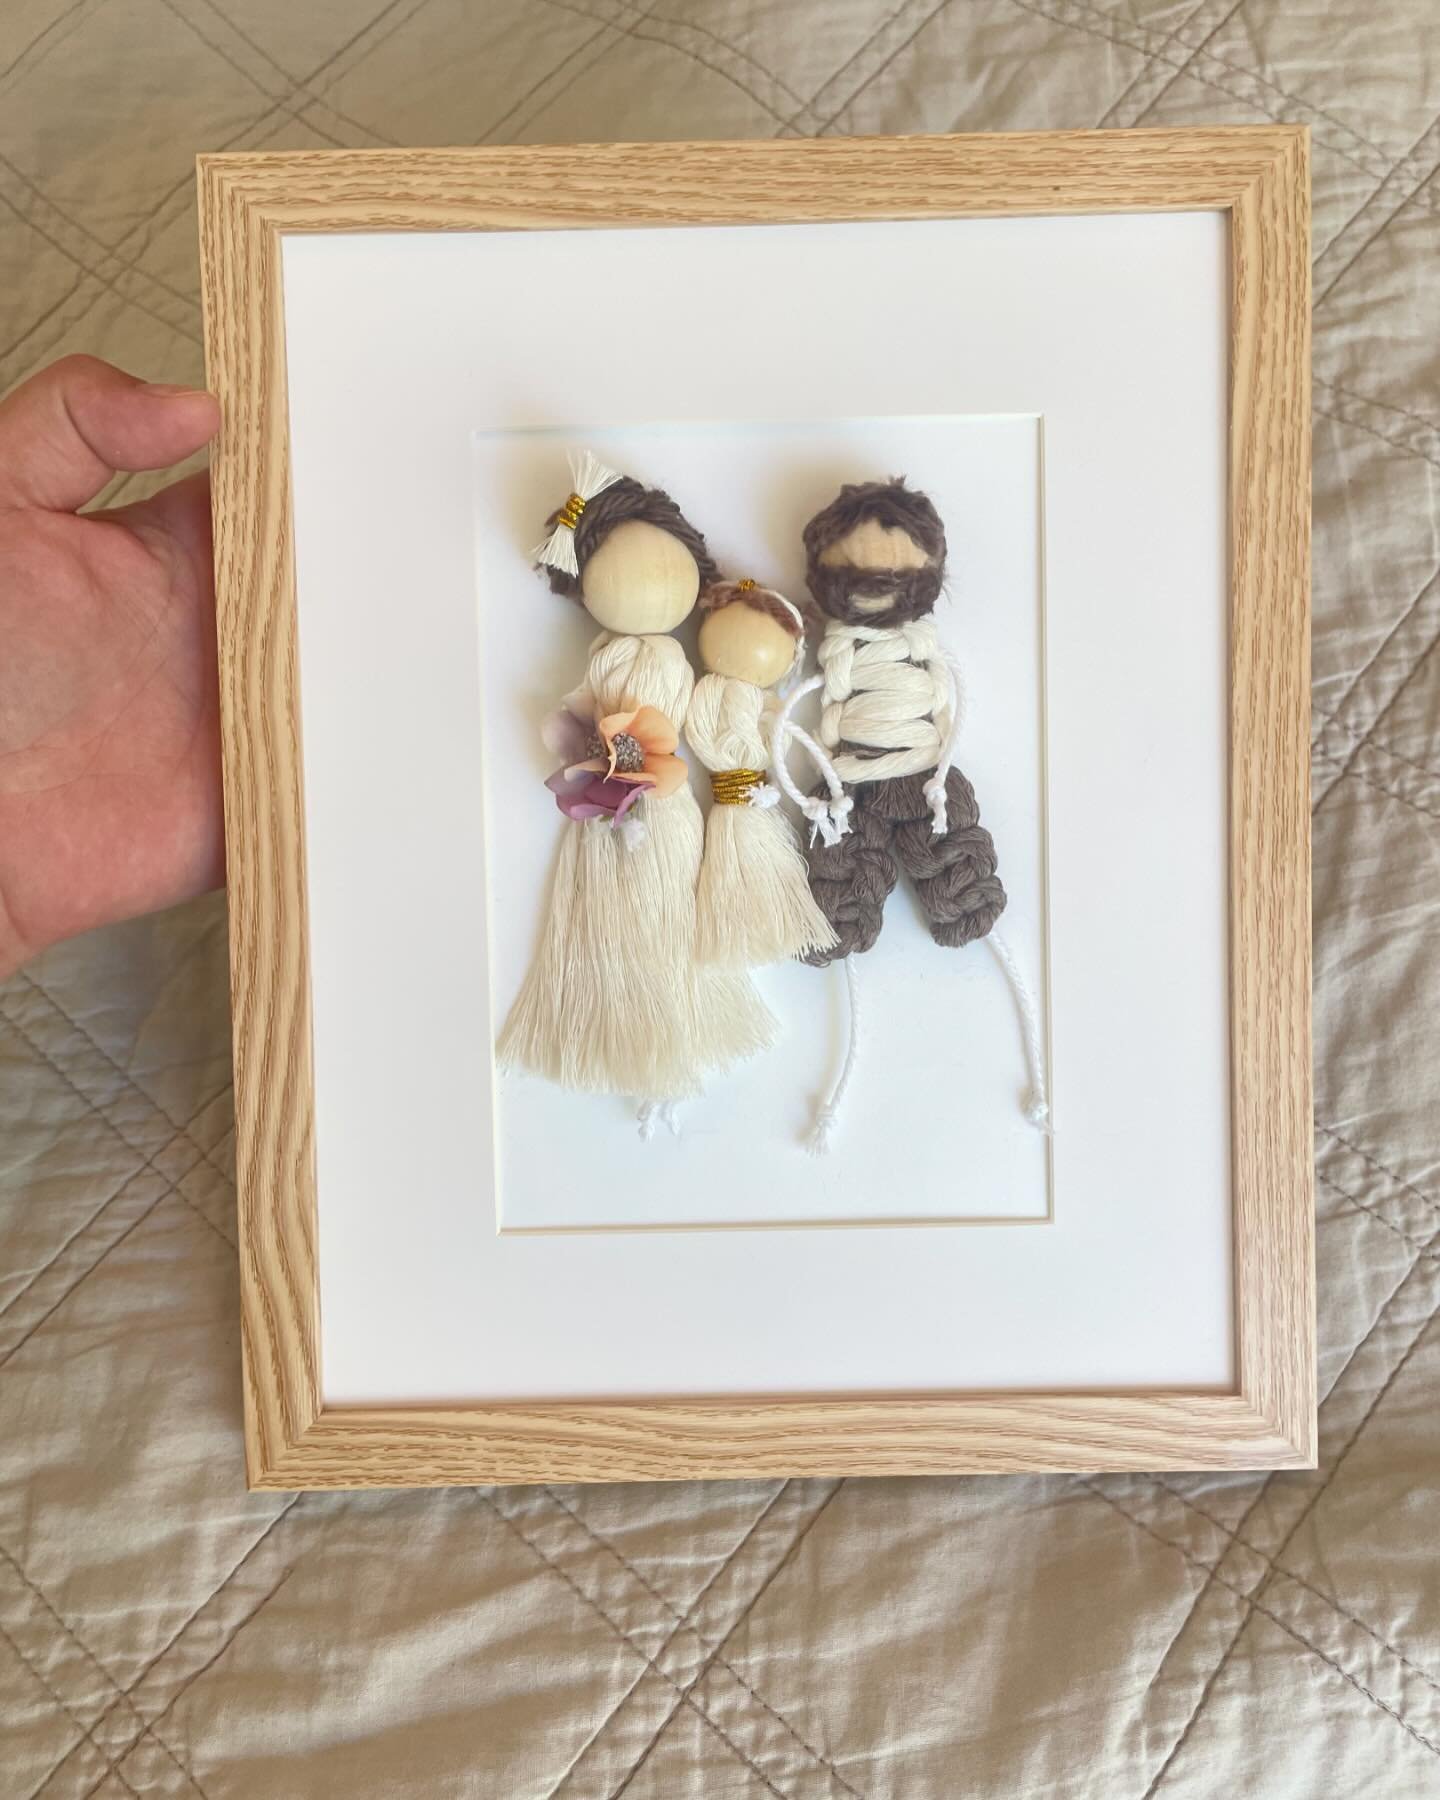 ✨🖼️ custom macrame doll portraits 💝✨

Turn those pics on your phone 🤳 into a piece of boho inspired art for your home! 

Each doll is handmade with details to reflect what makes you, YOU 🎀 down to the hair/hair style 🥹

Treat yourself this Mothe